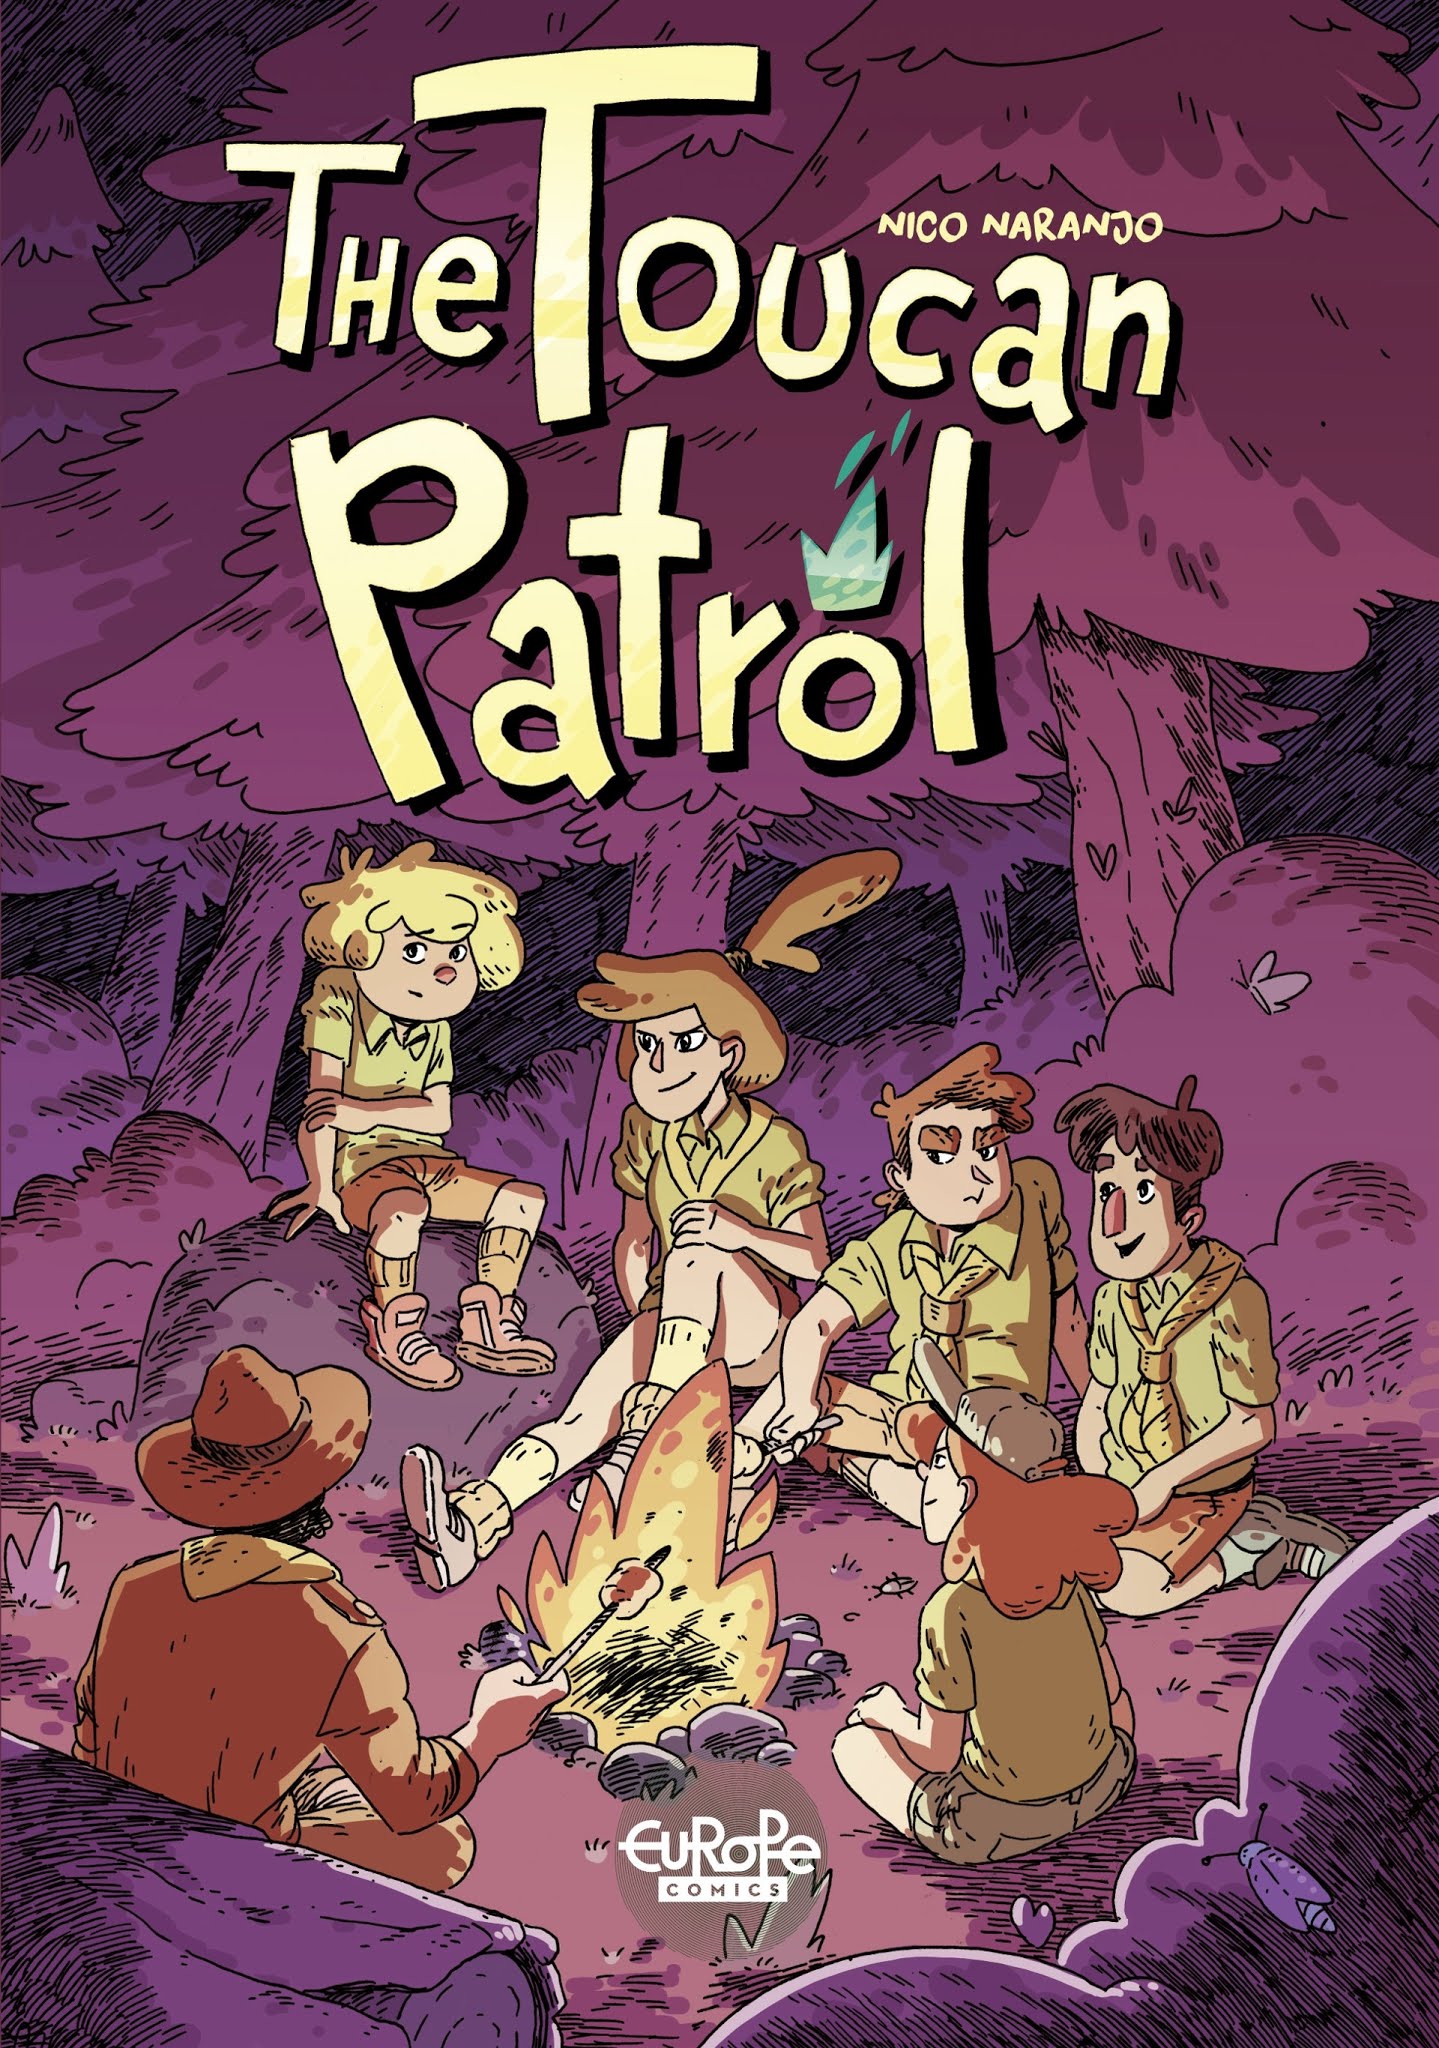 Read online The Toucan Patrol comic -  Issue # Full - 1